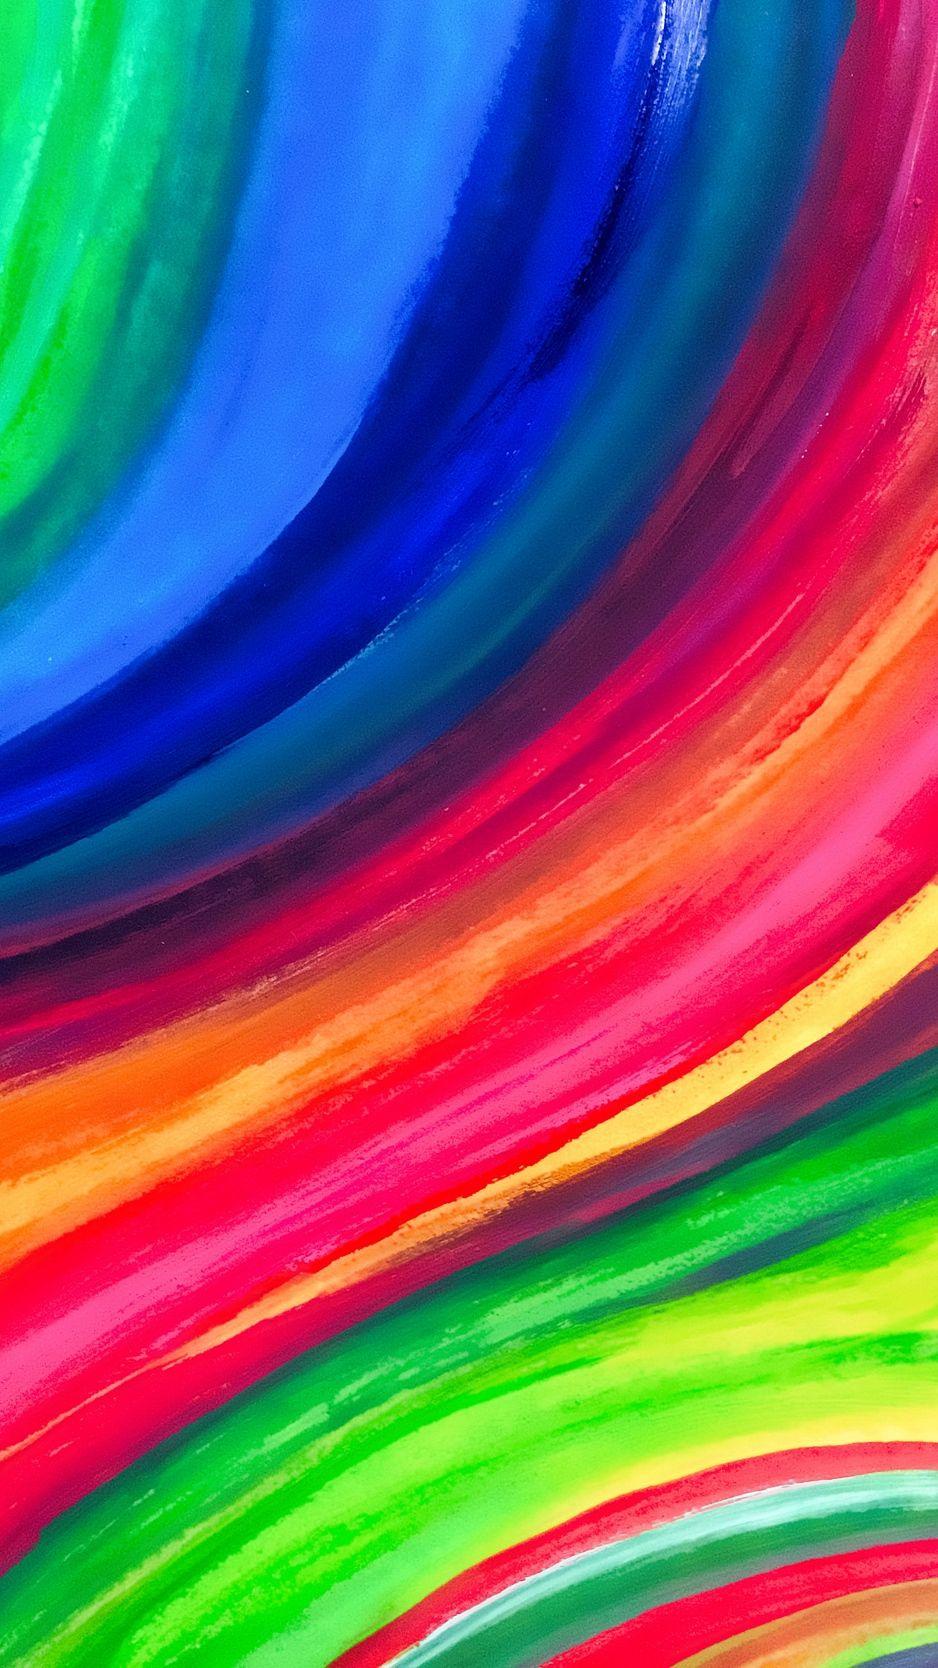 Download wallpaper 938x1668 iridescent, colorful, lines, stripes